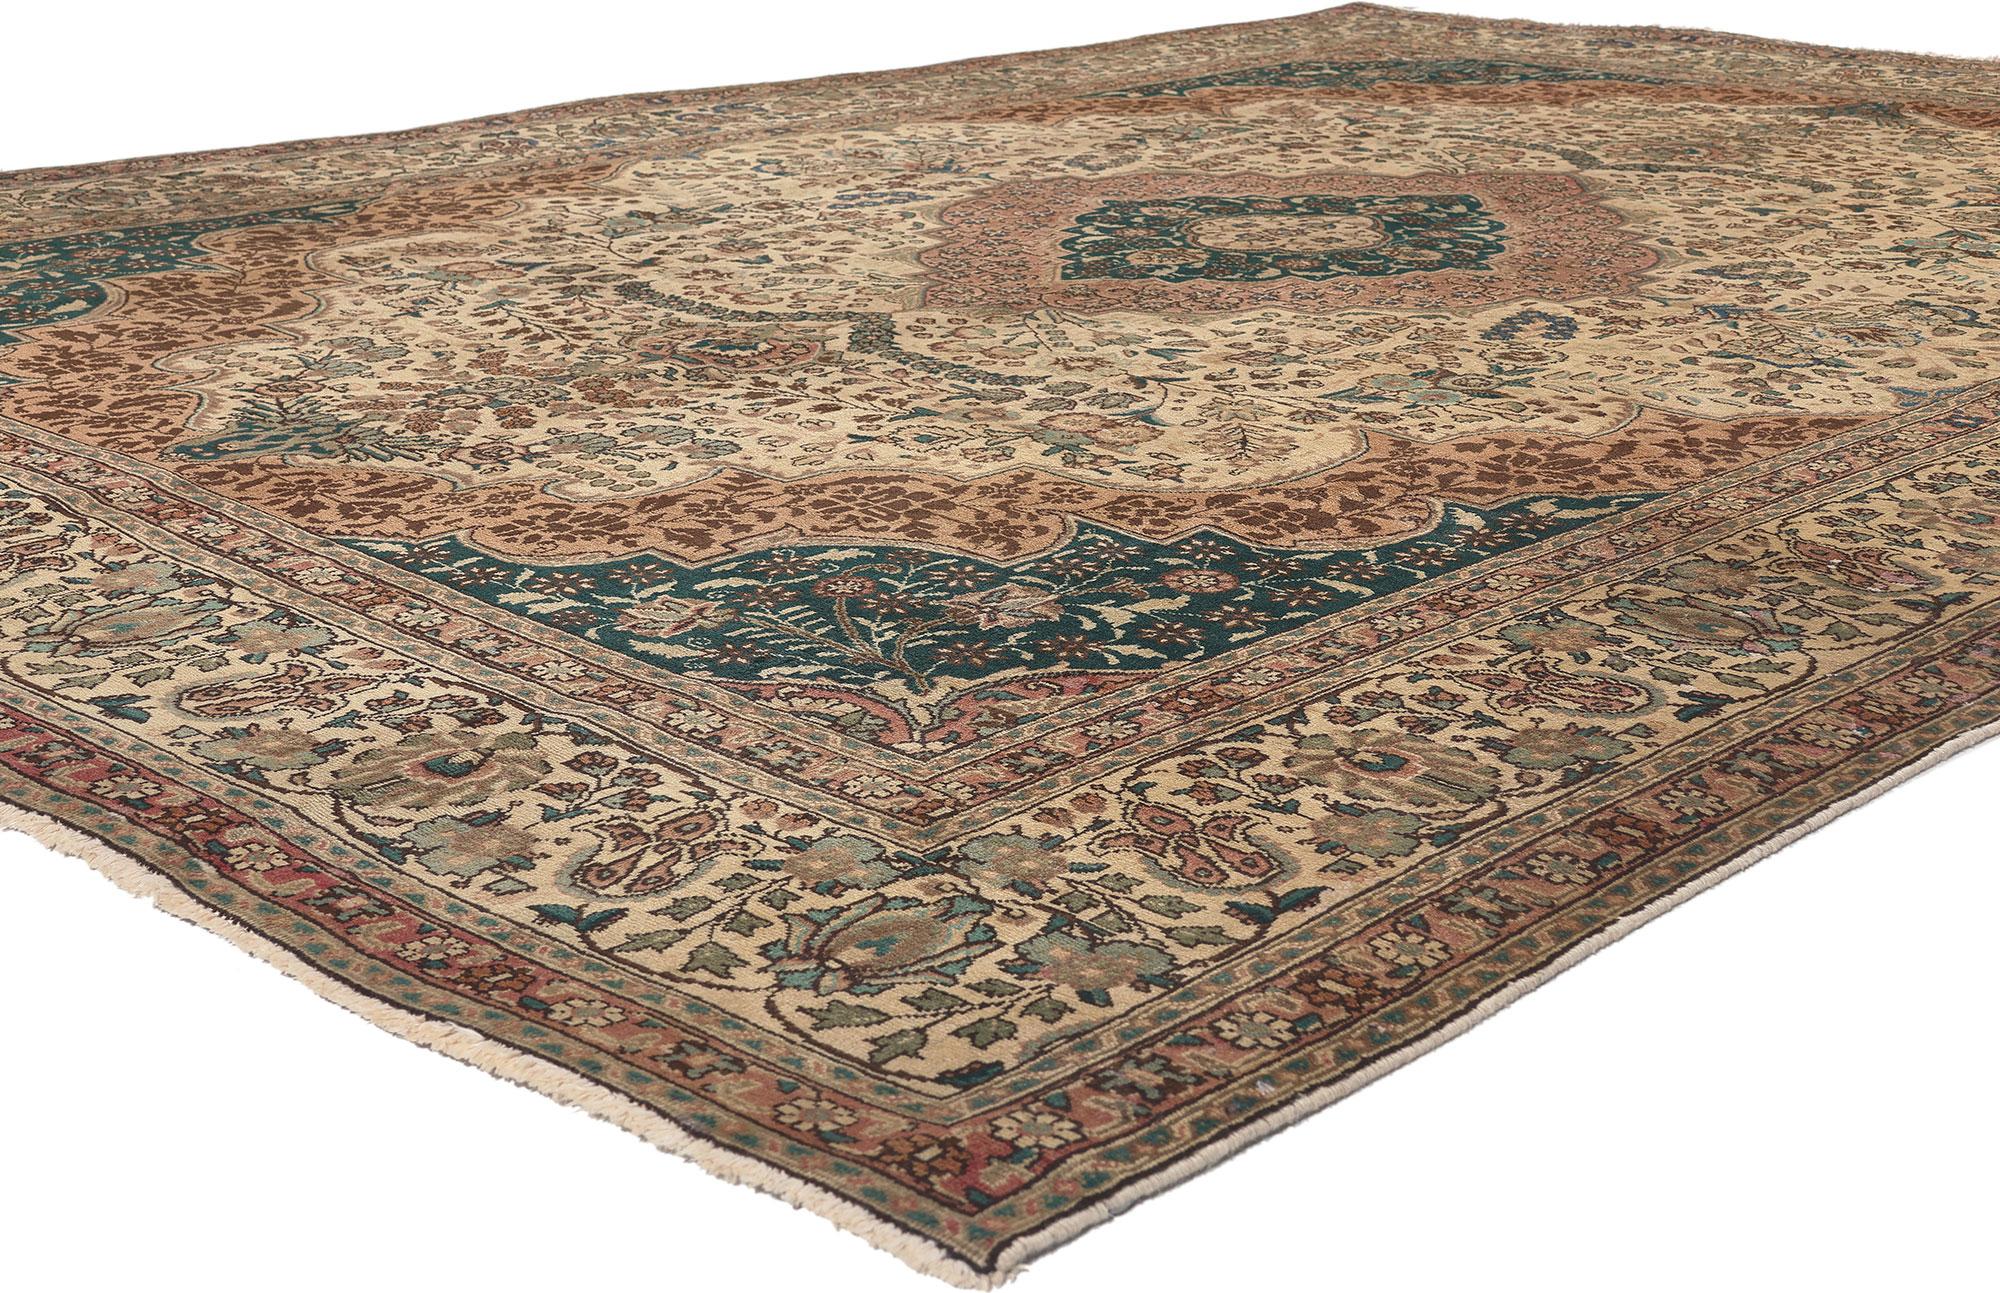 76476 Vintage Persian Tabriz Rug, 08’00 x 11’00. 
Warm opulence meets traditional sensibility in this vintage Persian Tabriz rug. The meticulous botanical details and earth-tone colors woven into this piece work together creating an elegant,